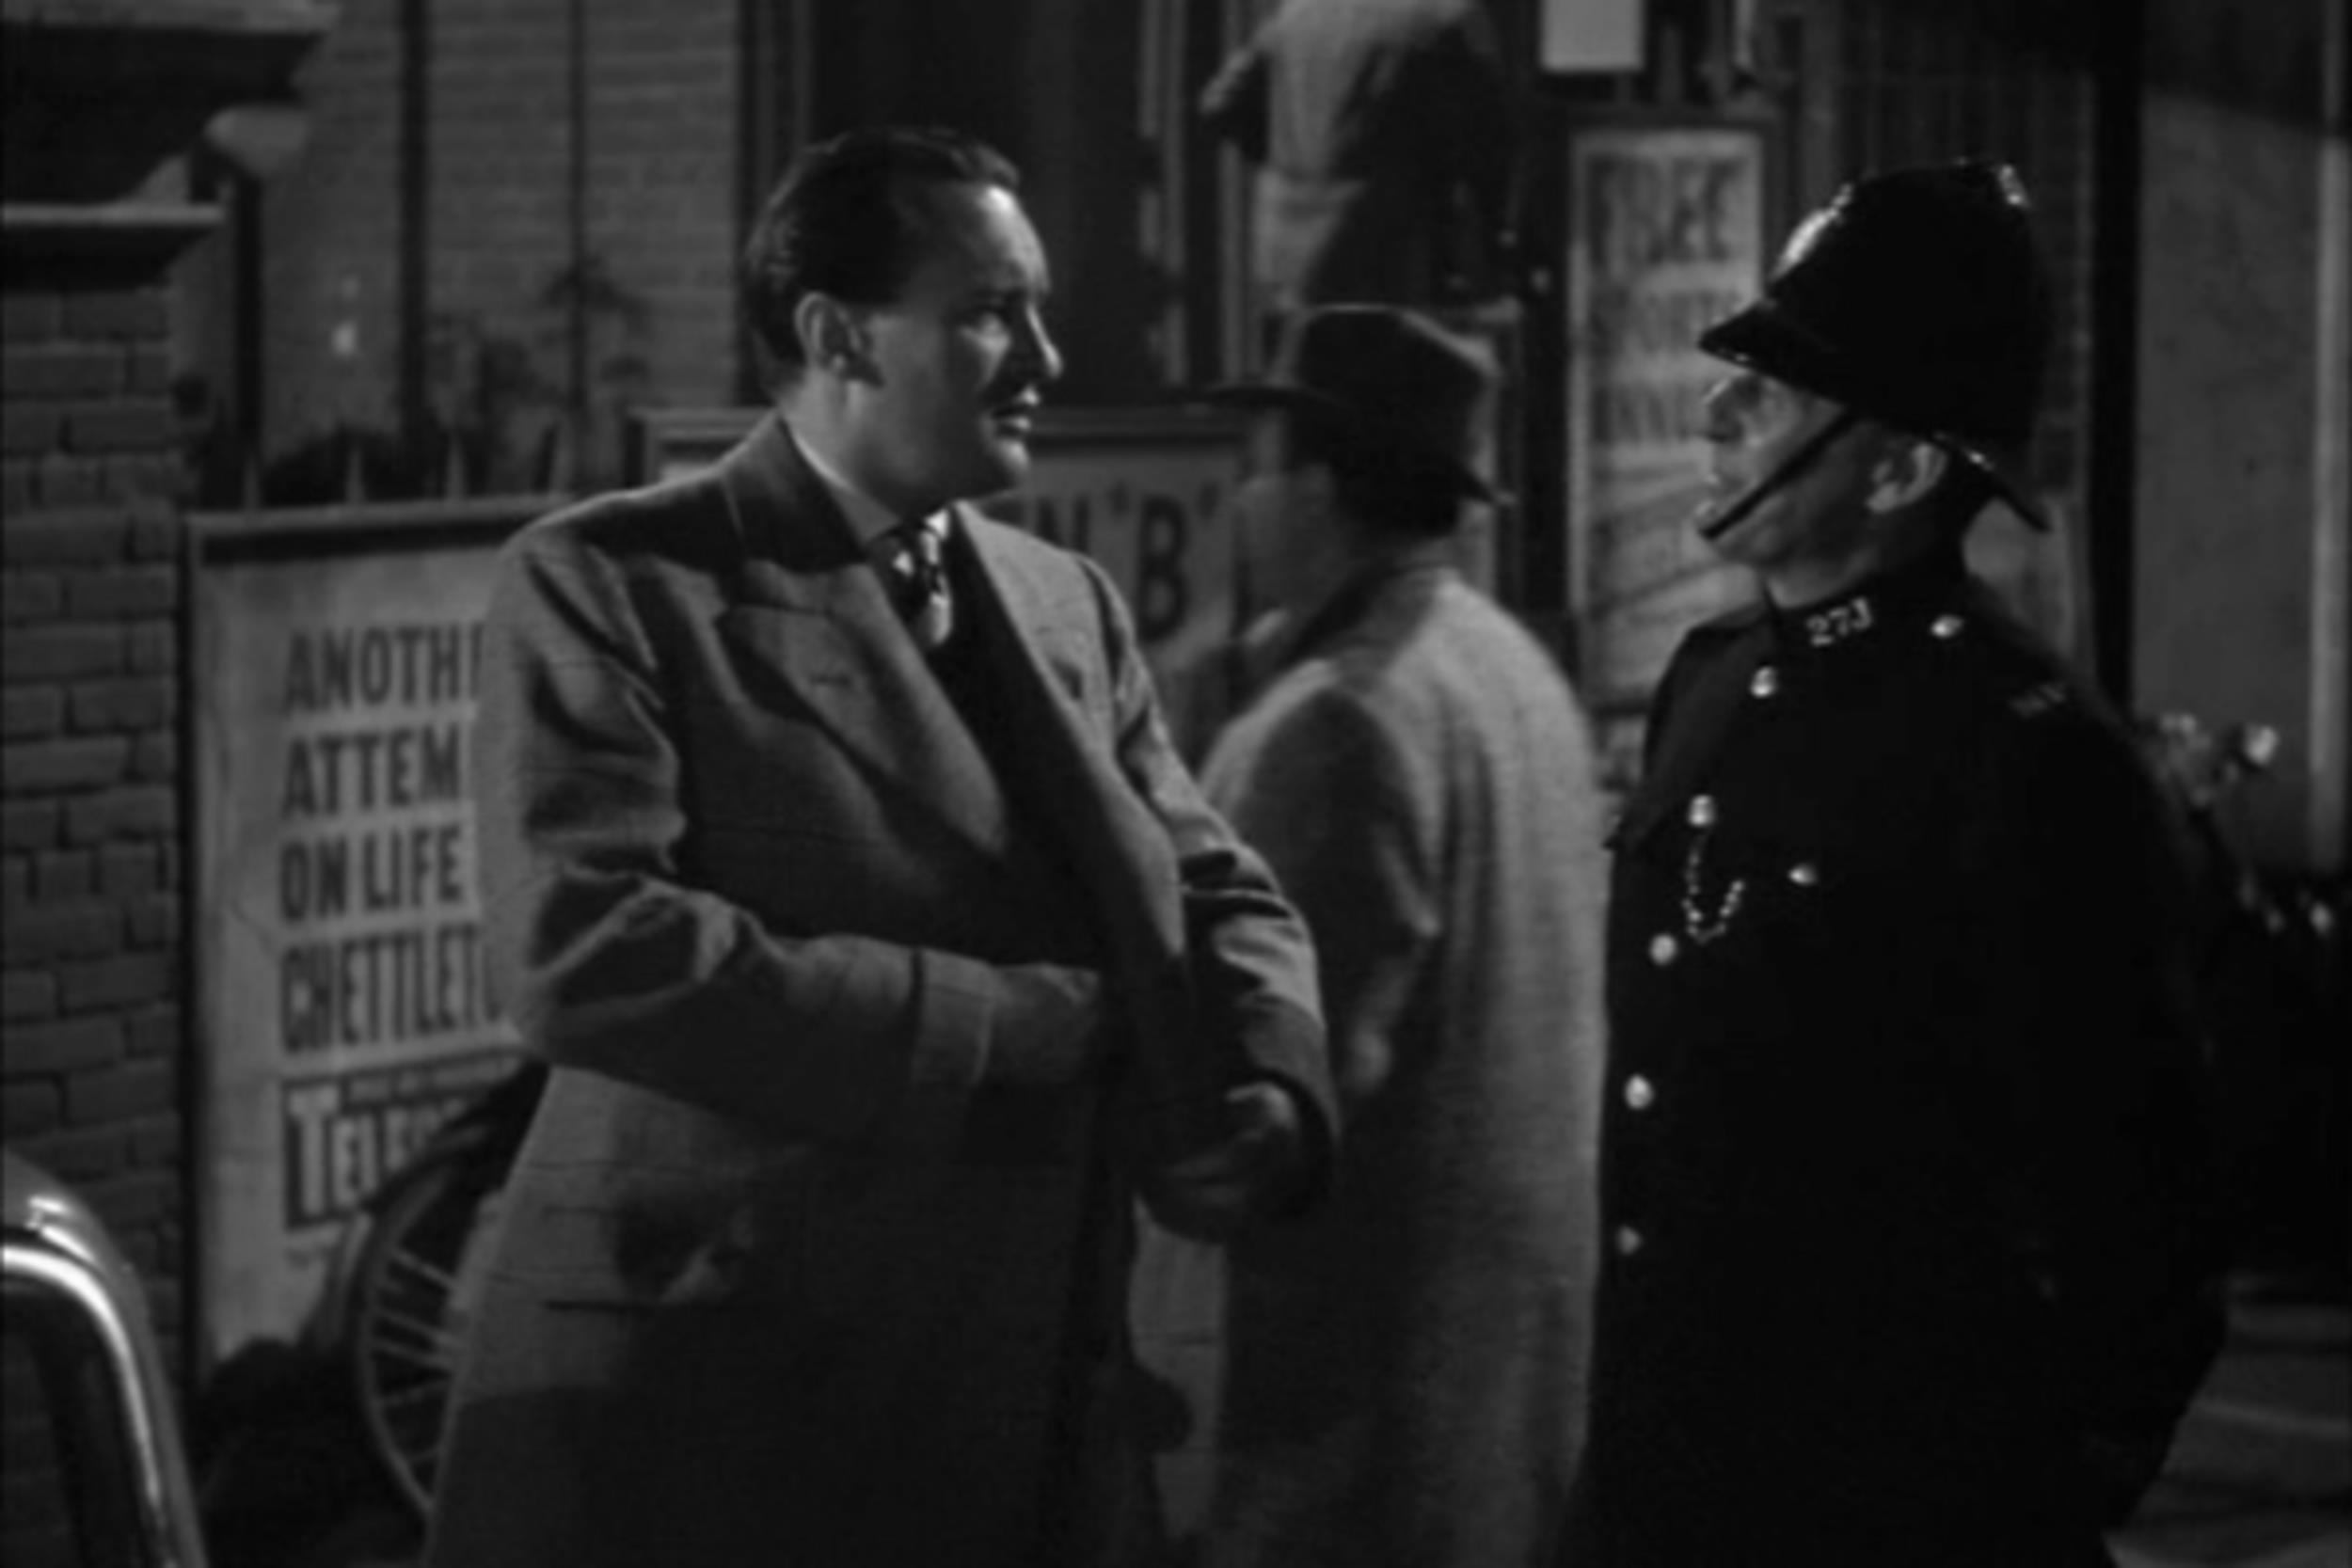 <p>Hitchcock came to America and immediately made a splash. While he didn’t win Best Director, “Rebecca” won Best Picture, the only Hitchcock film to do so. As Jack Favell talks to a police officer, Hitchcock makes a quick pass in the background. Hey, this time he’s not out front!</p>